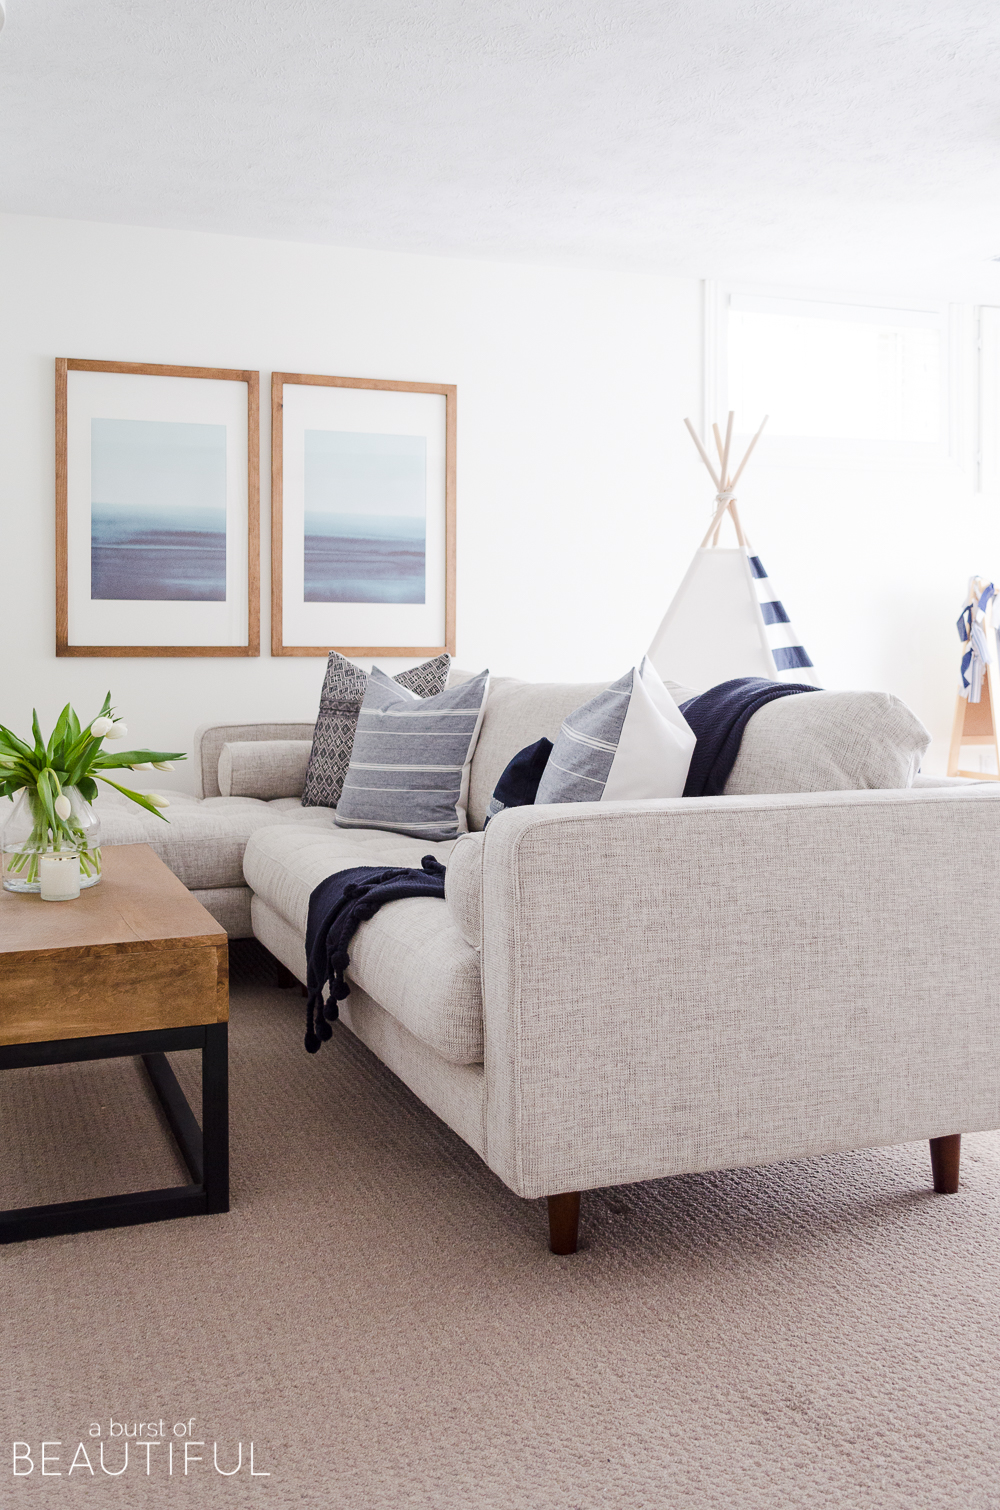 A bright family room features the perfect mix of traditional and modern design elements, including a mid-century modern sofa, open shelving and shiplap walls.